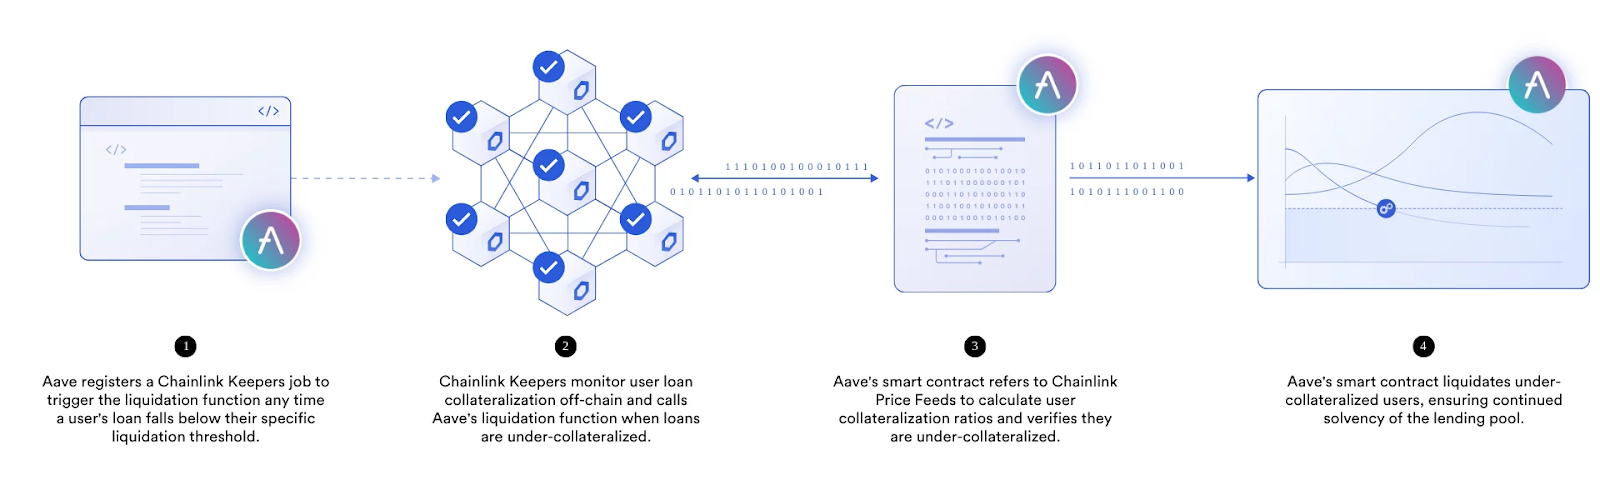 A diagram showing how Aave is integrating Chainlink Keepers to automate liquidations.